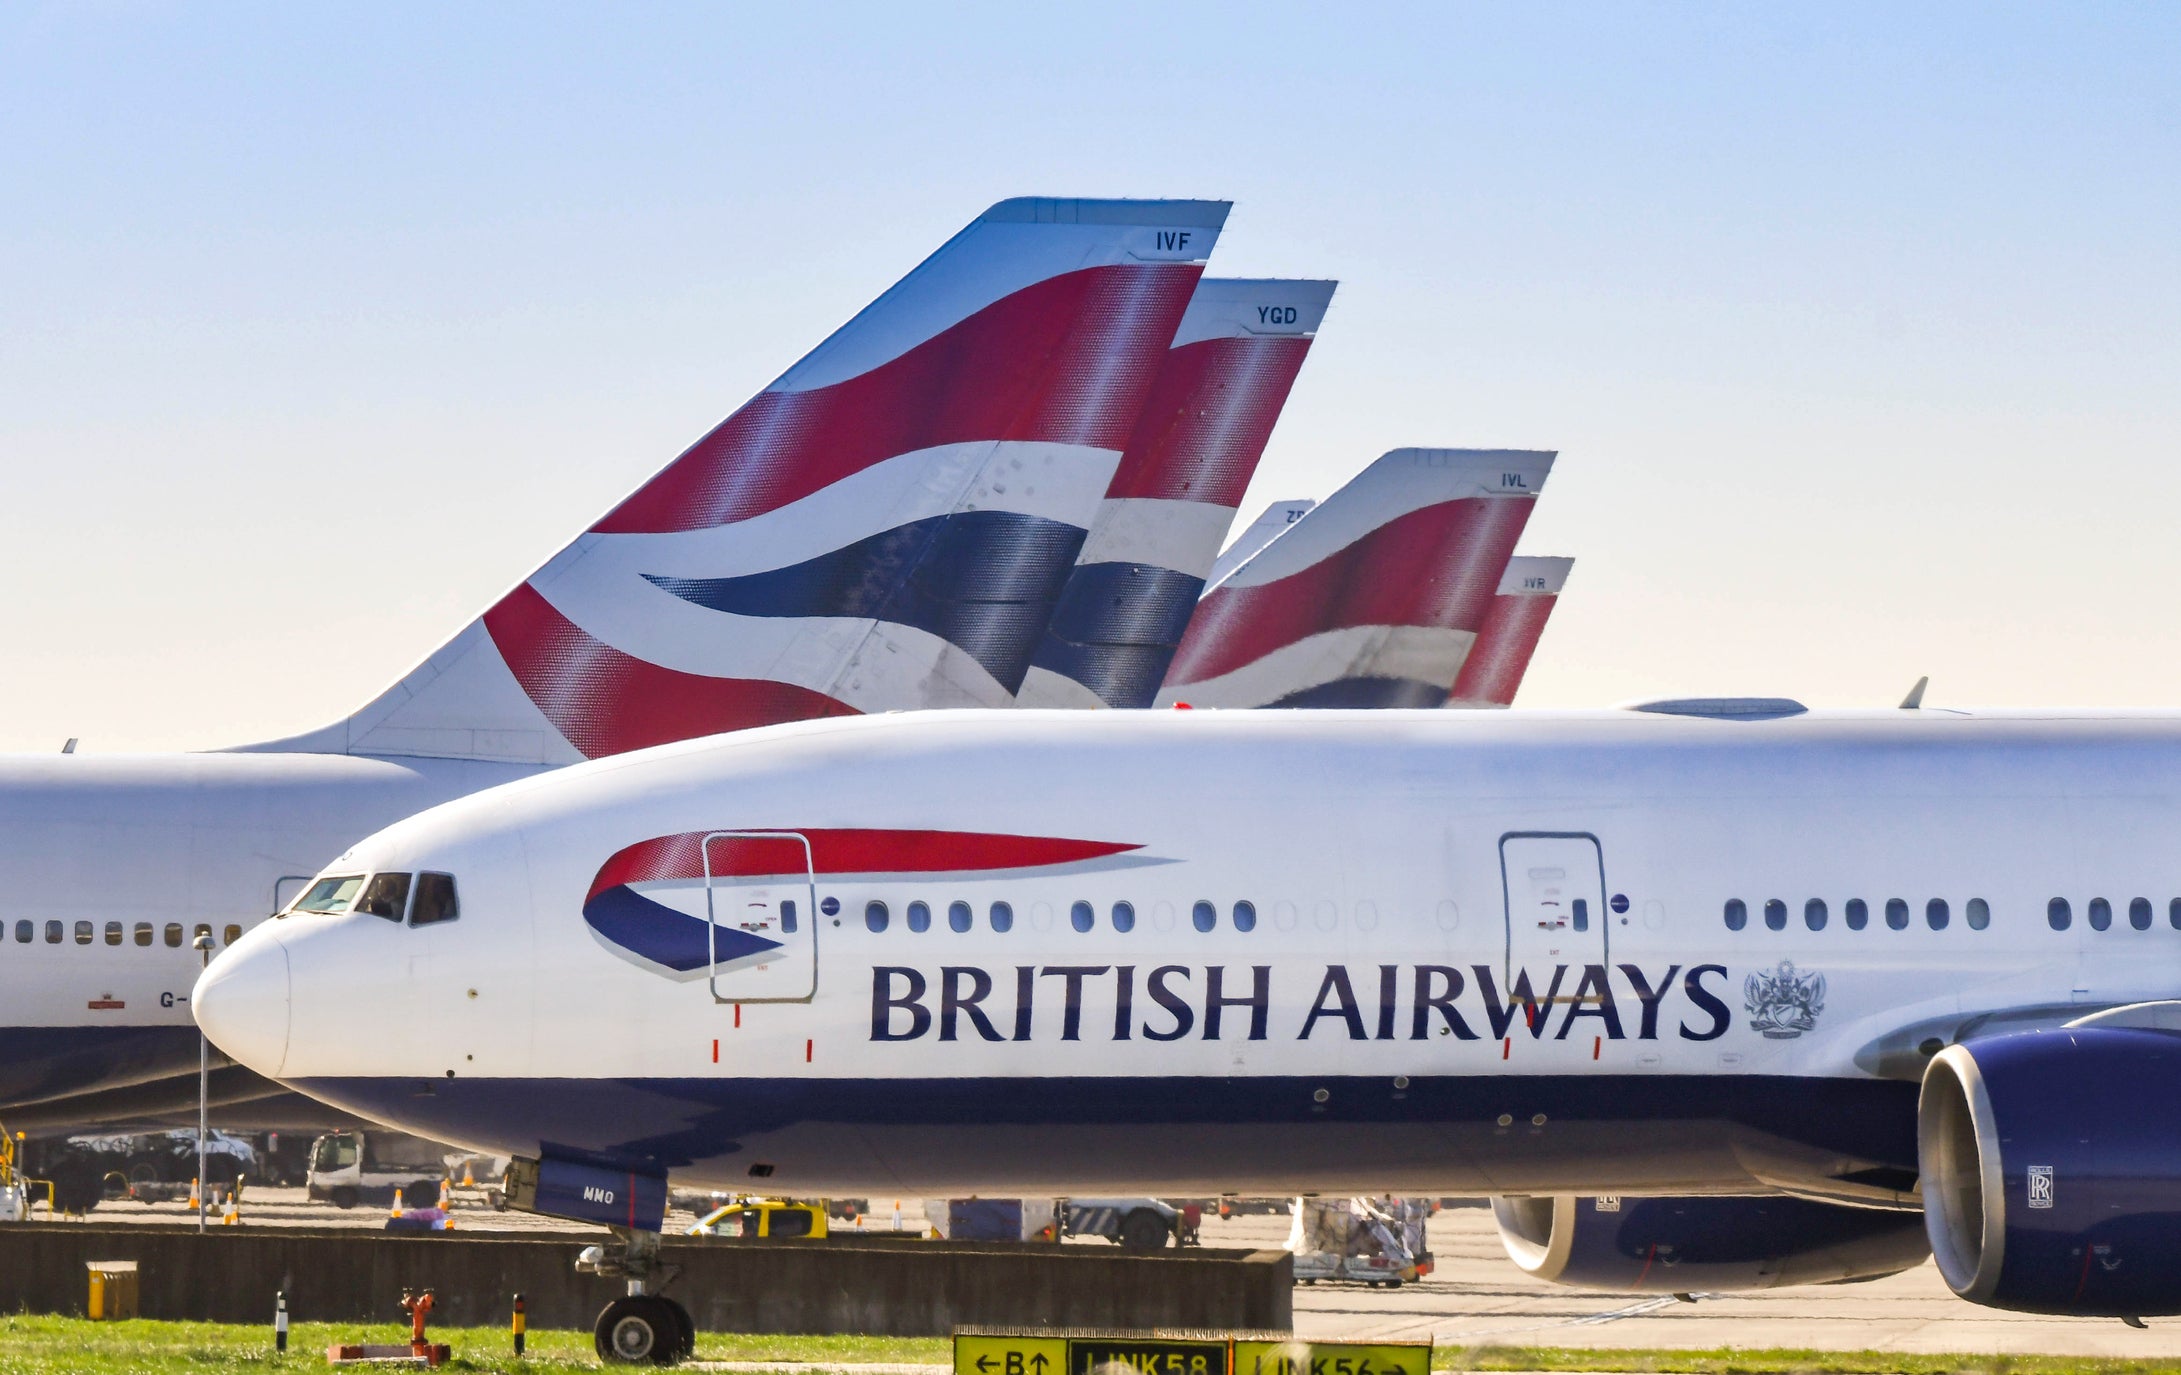 British Airways male pilots and crew allowed to wear makeup and piercings |  The Independent